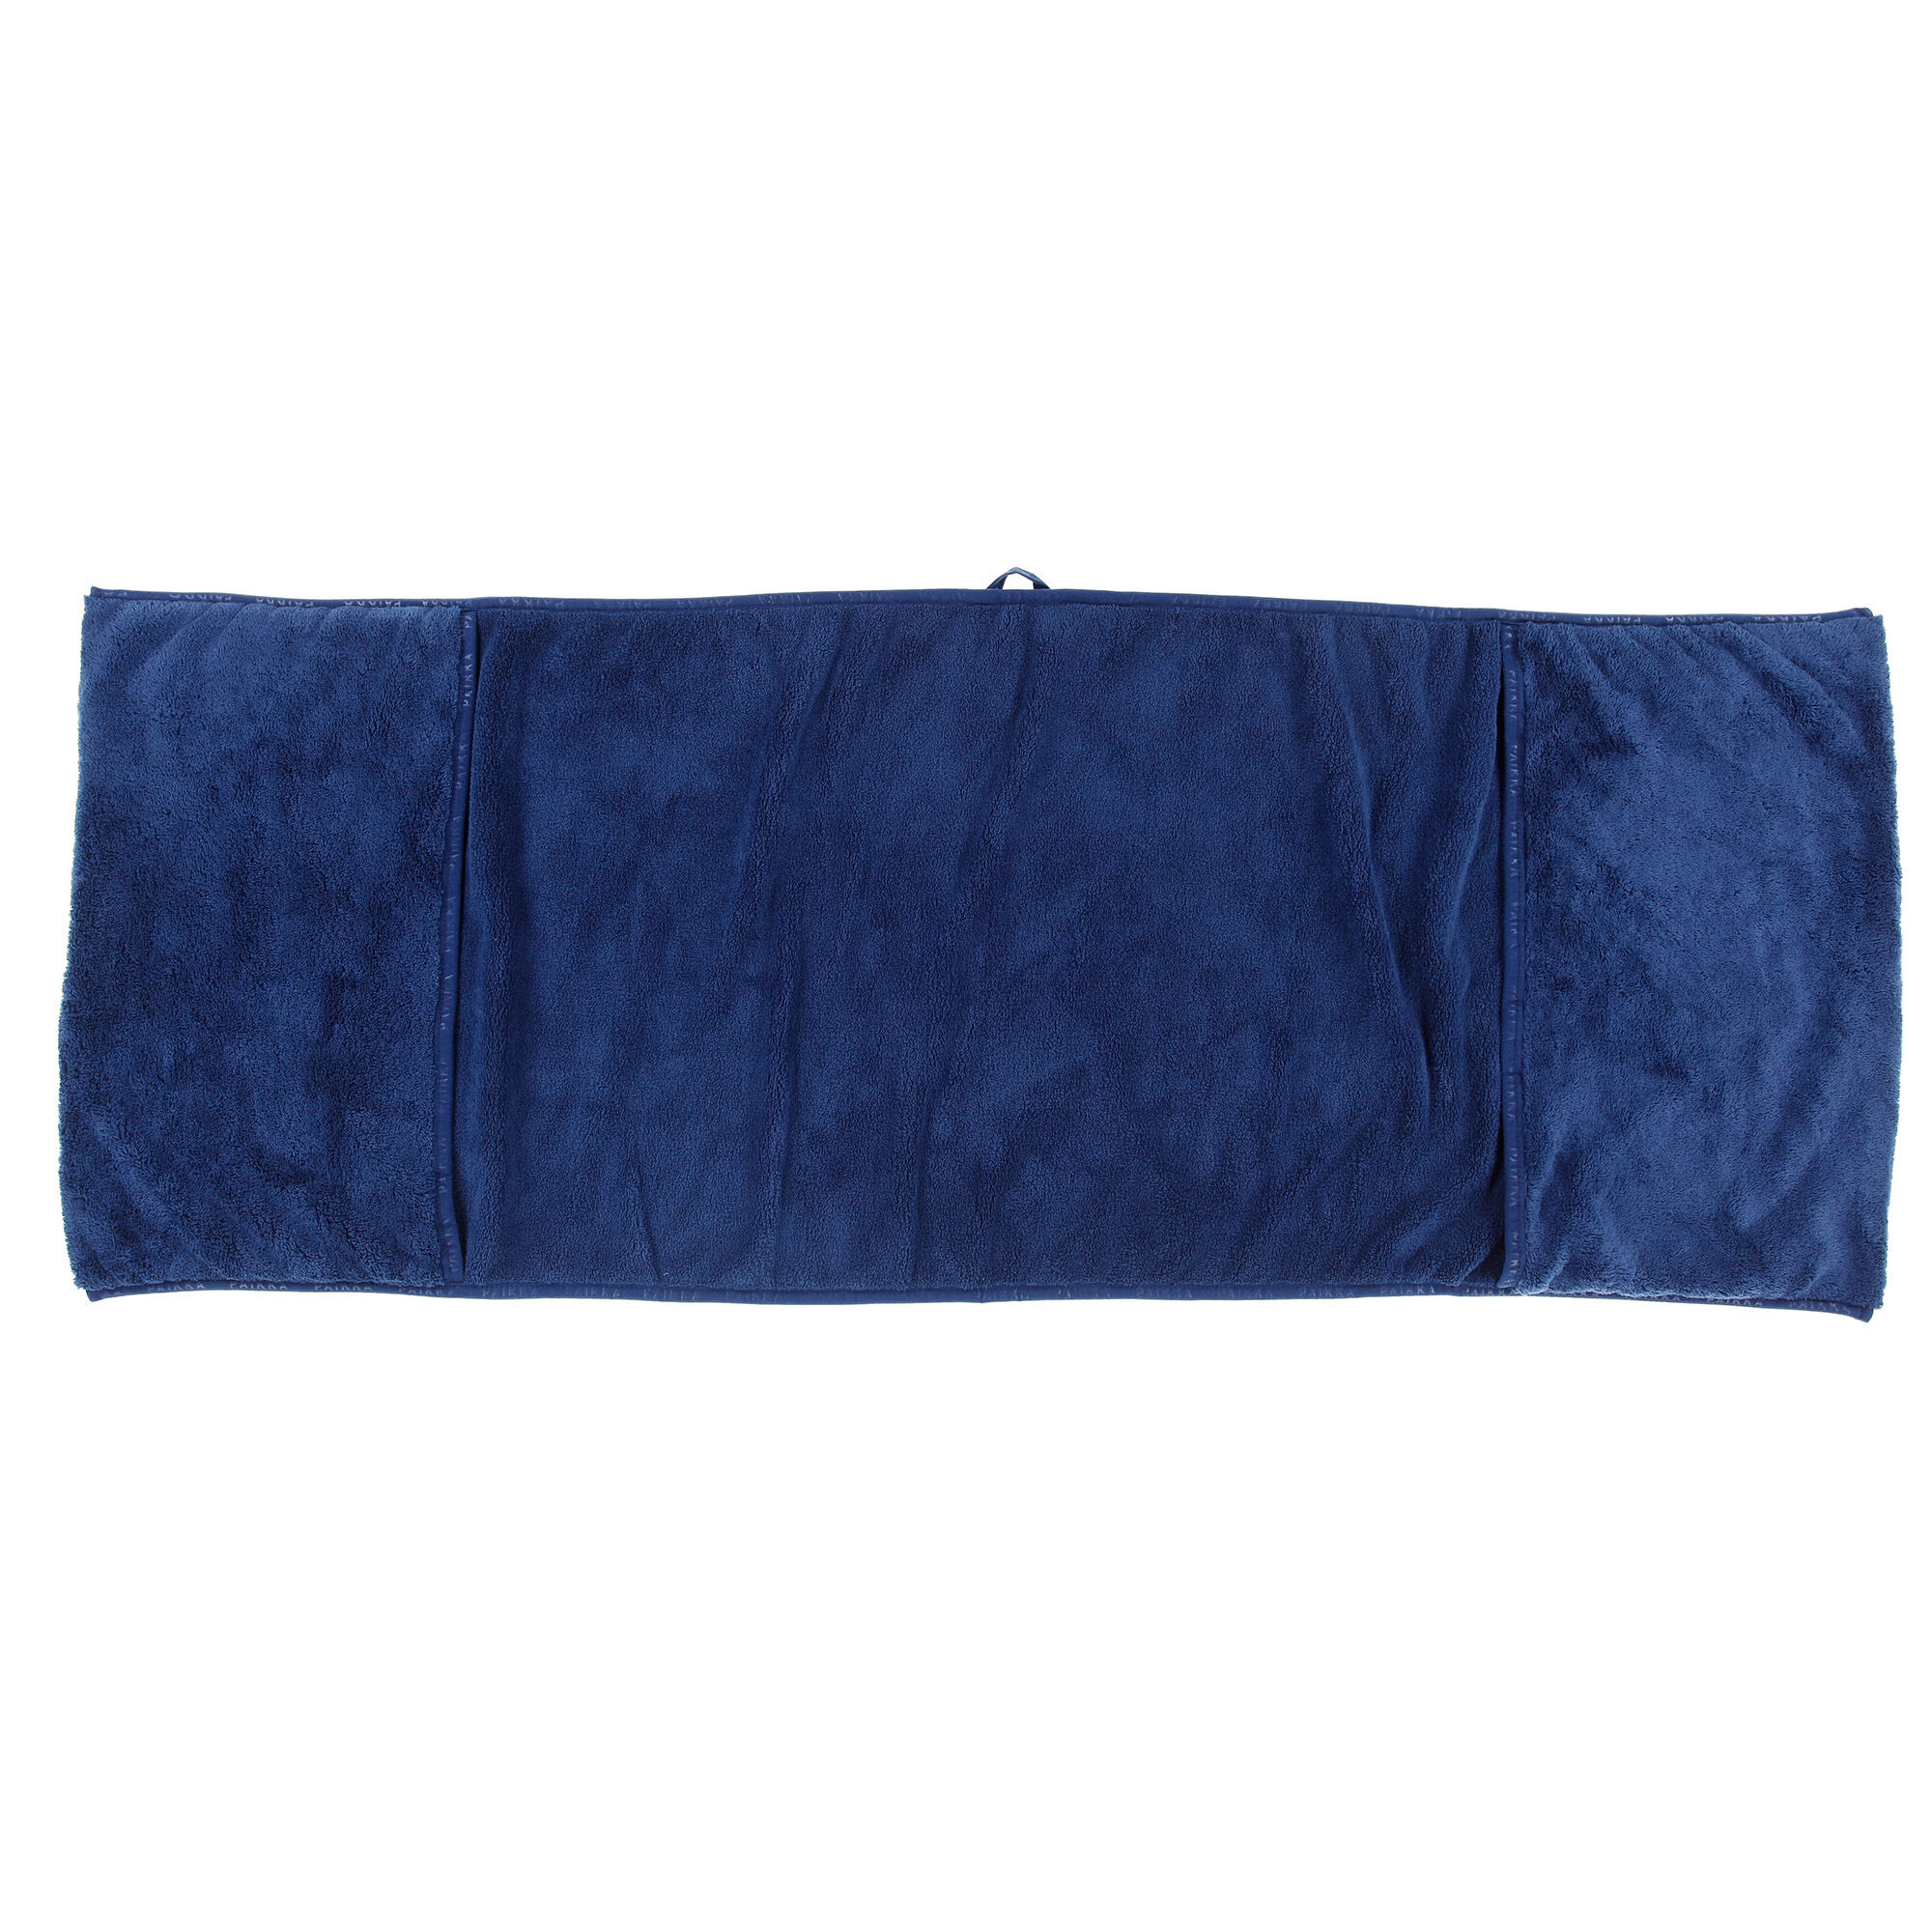 PAIKKDrying-Towel-Comfort-Navy-Taupe-Hundhandtuch-60-46643